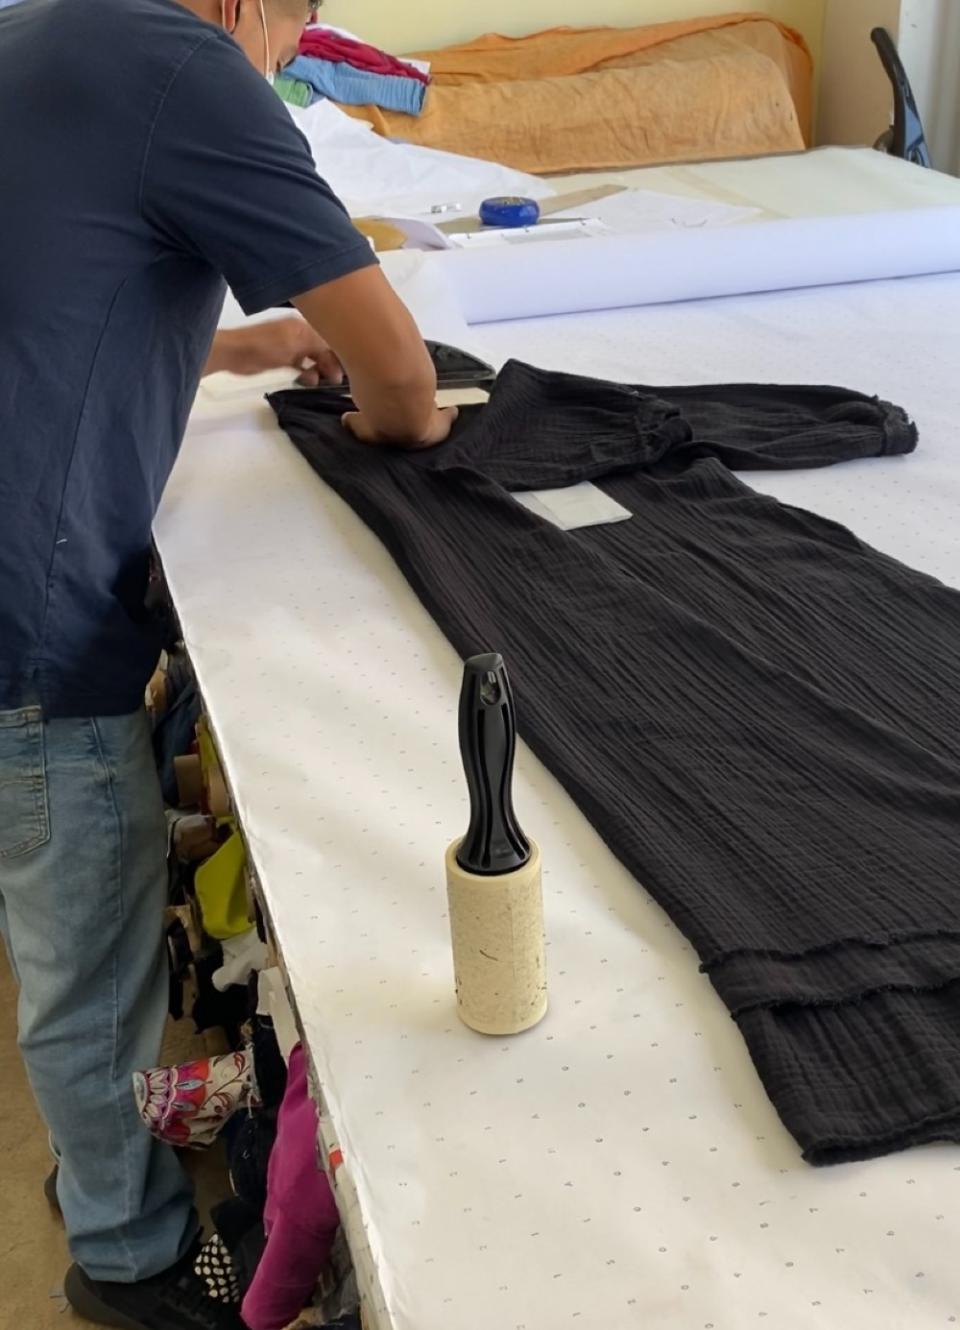 A worker at Ocean+Main putting the finishing touches on a caftan.